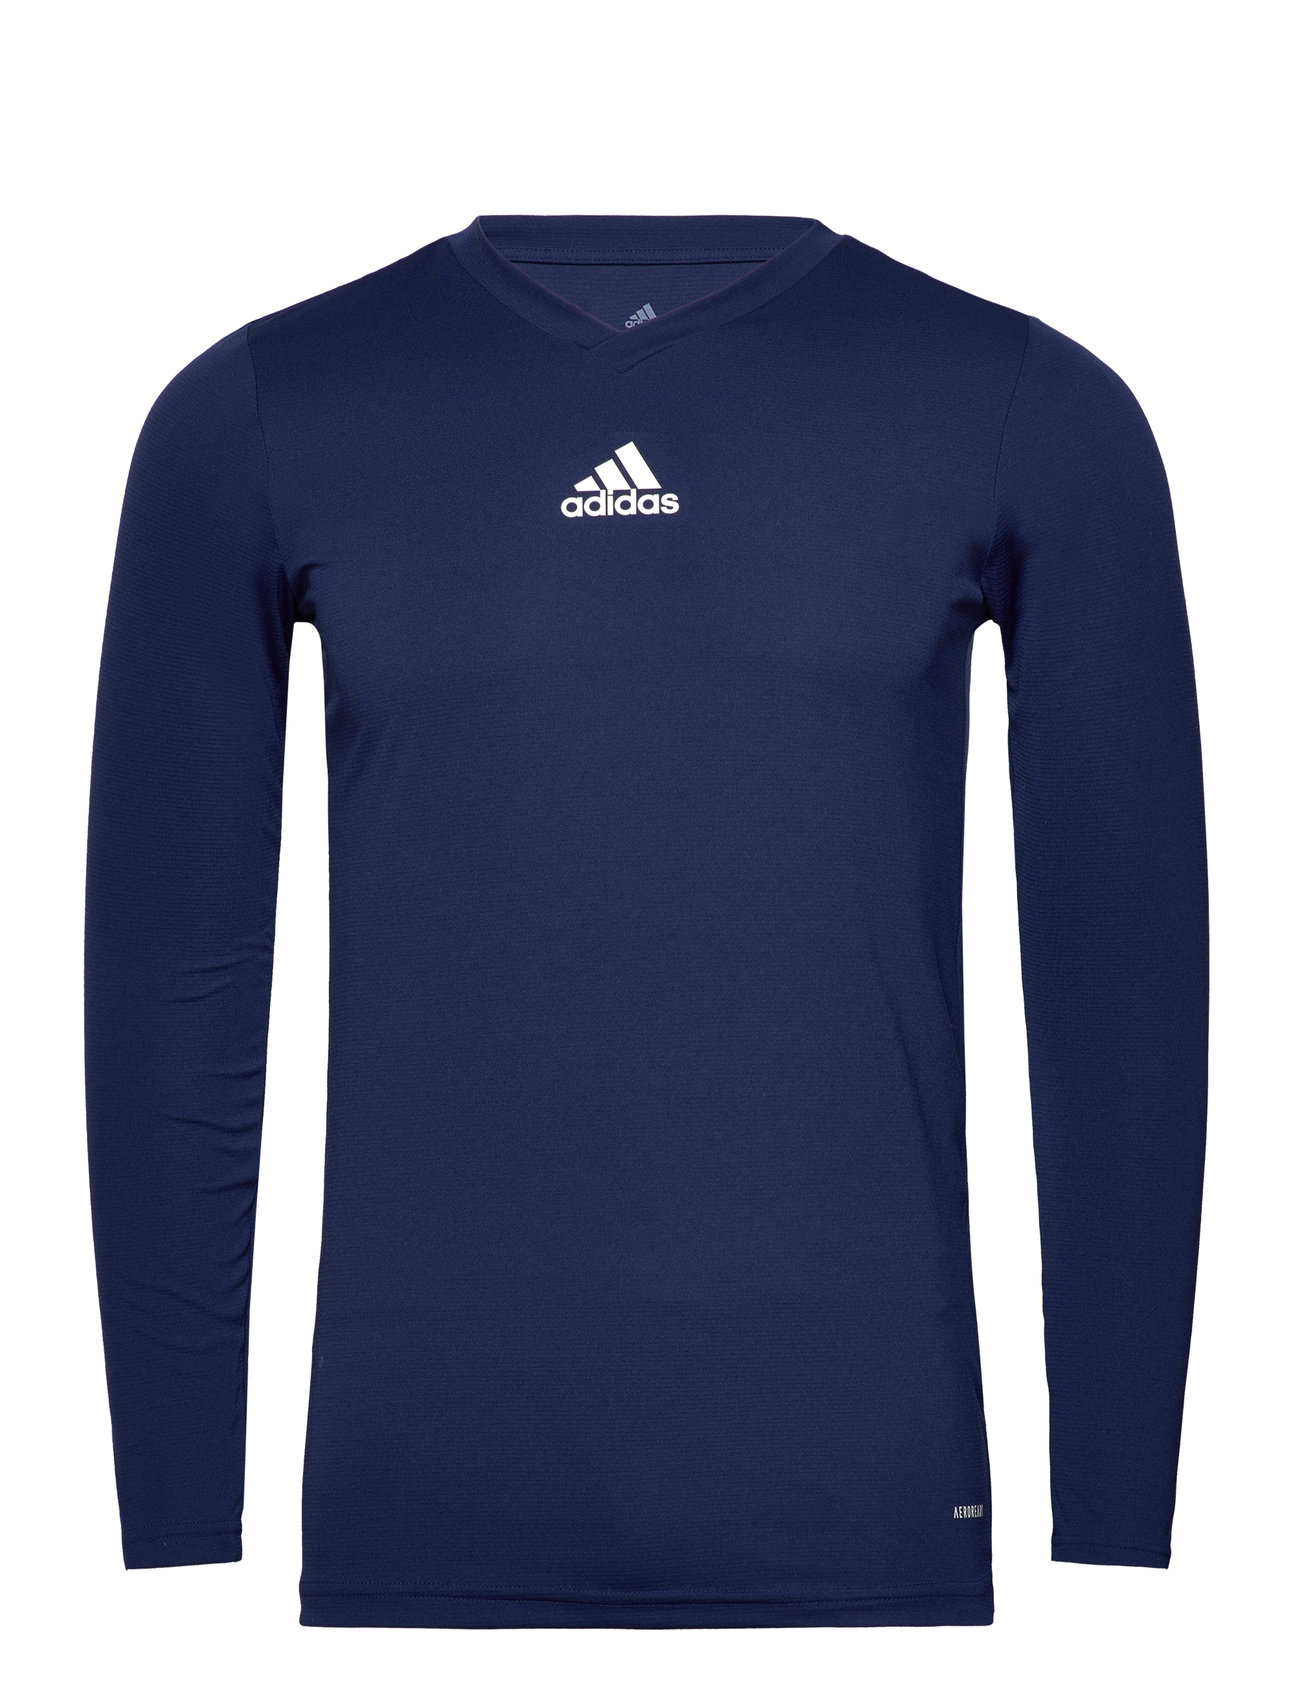 Team Base Youth Tee Sport T-shirts Long-sleeved T-shirts Navy Adidas Performance